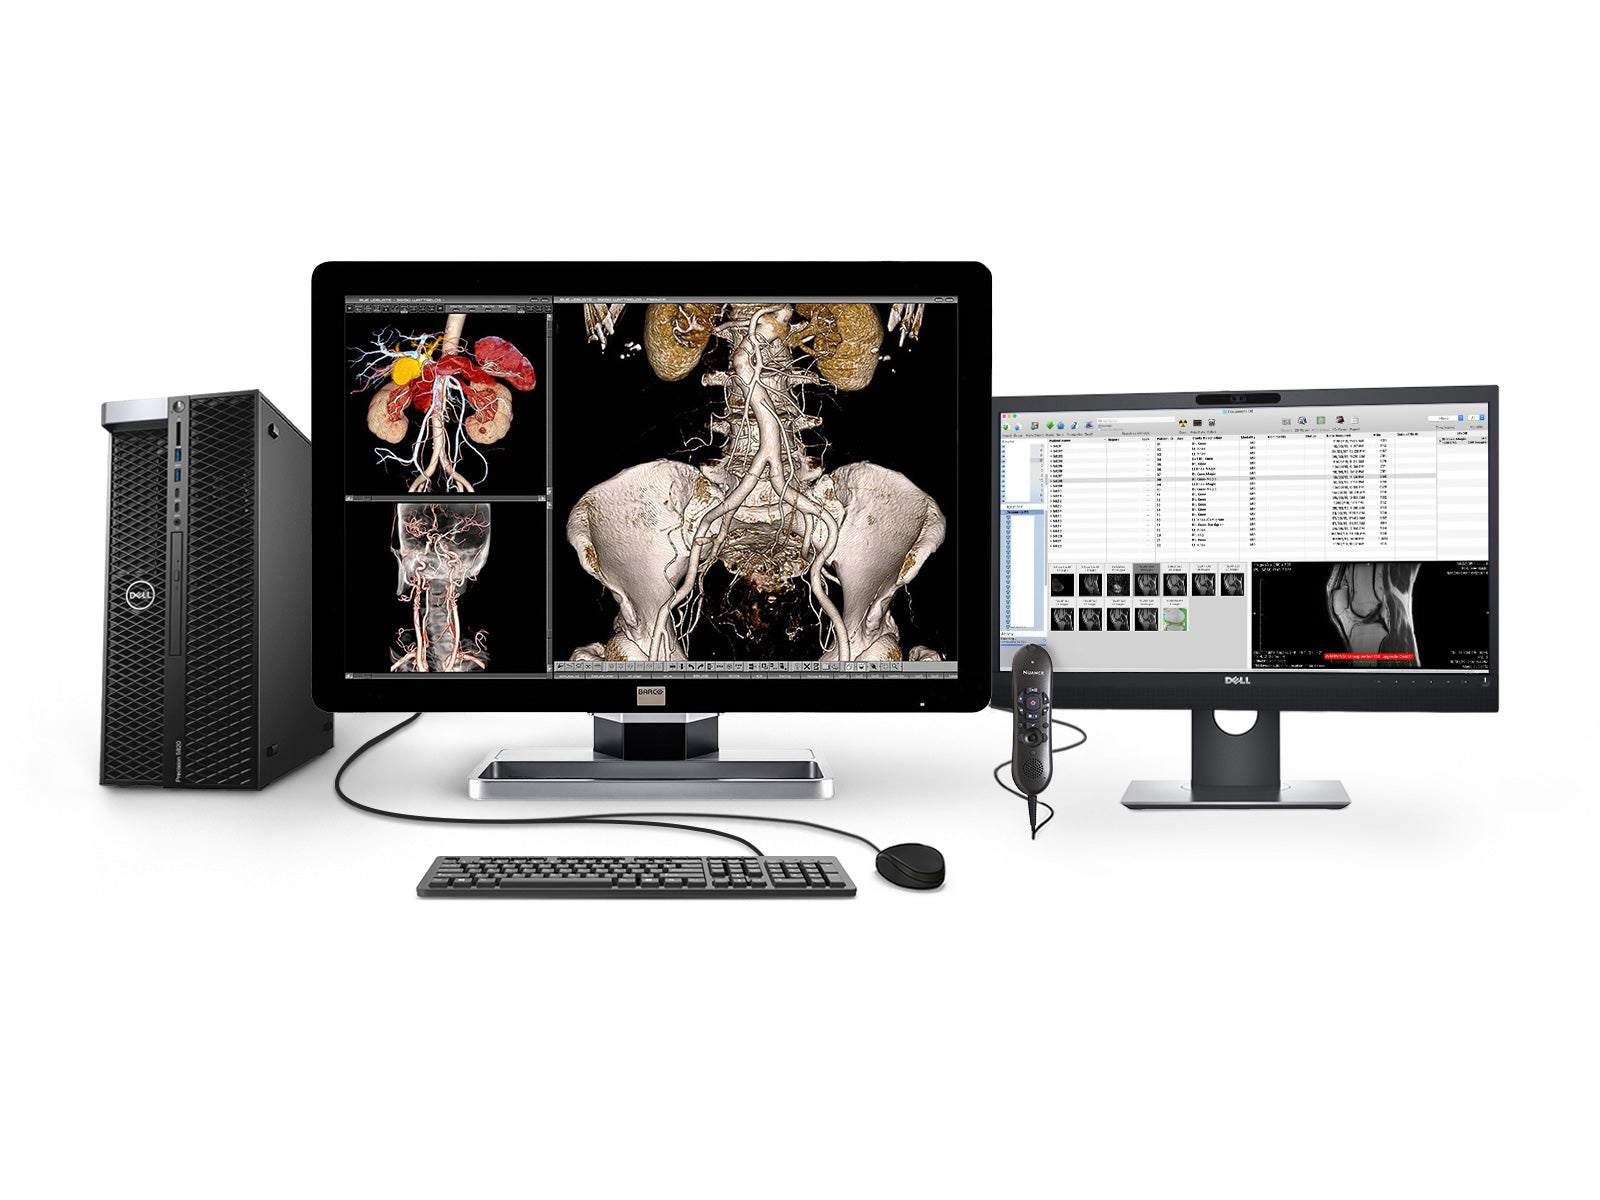 Complete PACS General Radiology Station | Barco 4MP Color LED Display | Dell Workstation | Dictation Mic | Worklist Monitor (43305820) (Copy) Monitors.com 